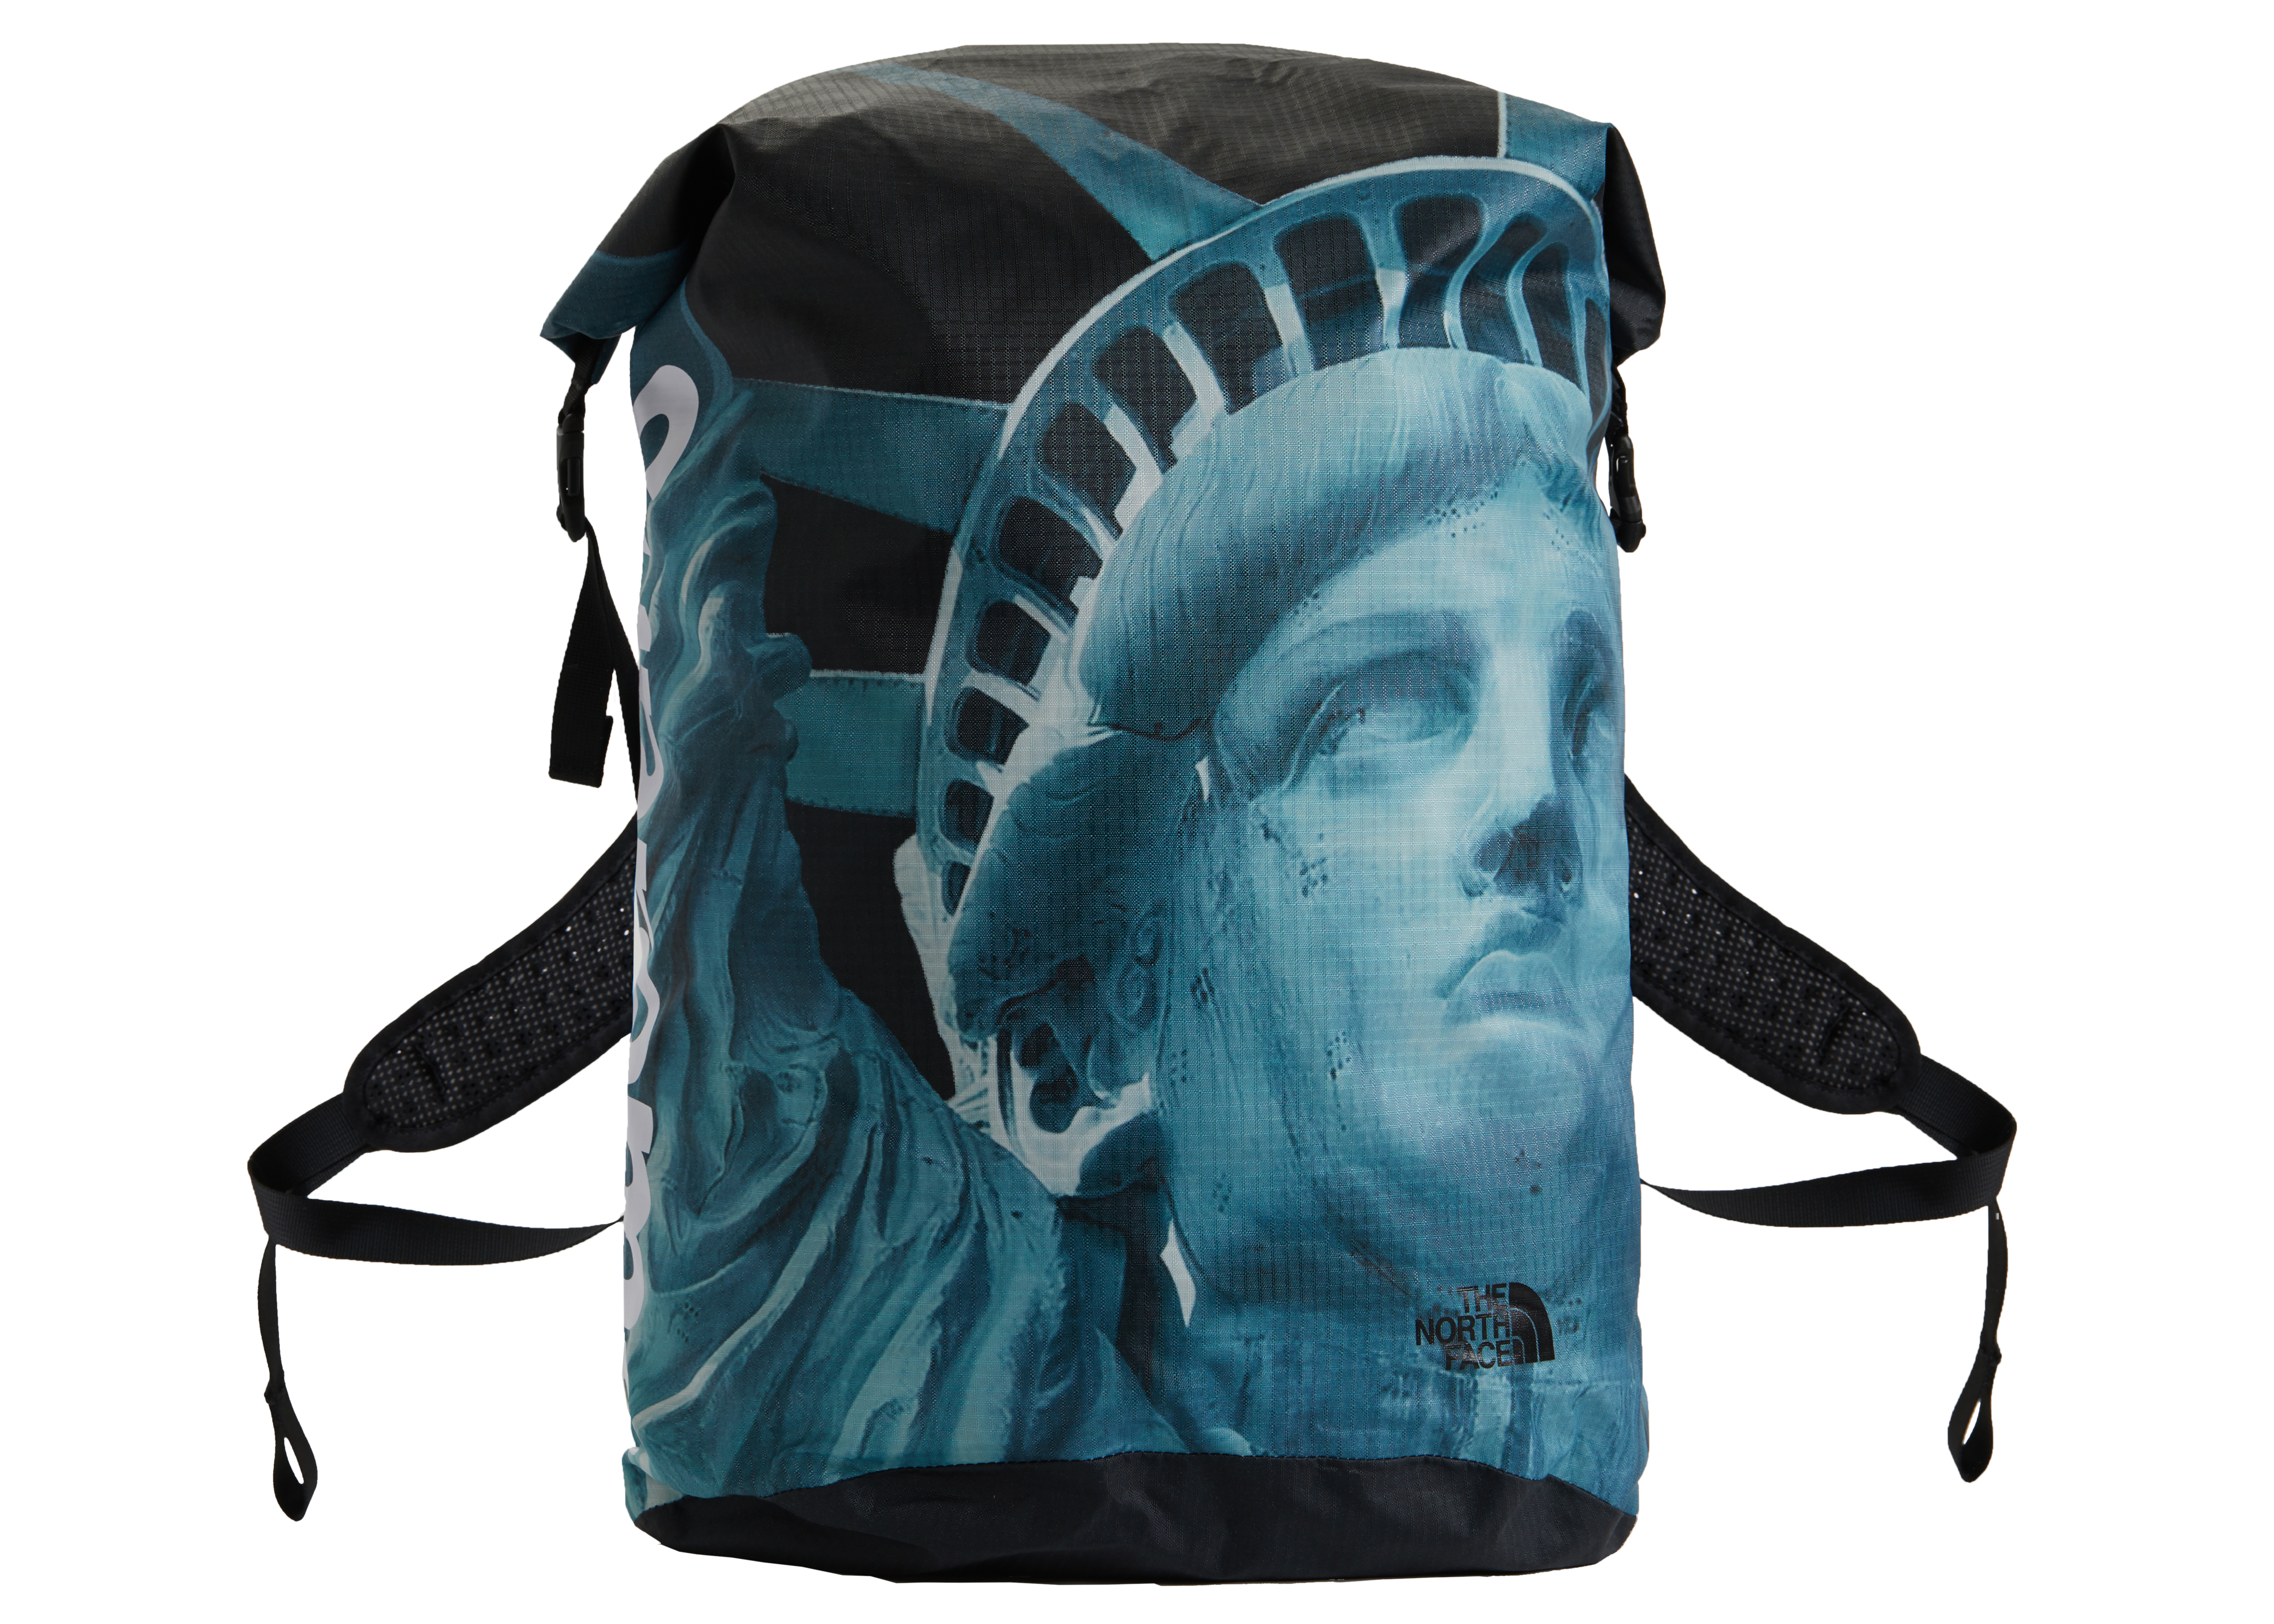 Supreme x The North Face Statue of Liberty Waterproof Backpack ...